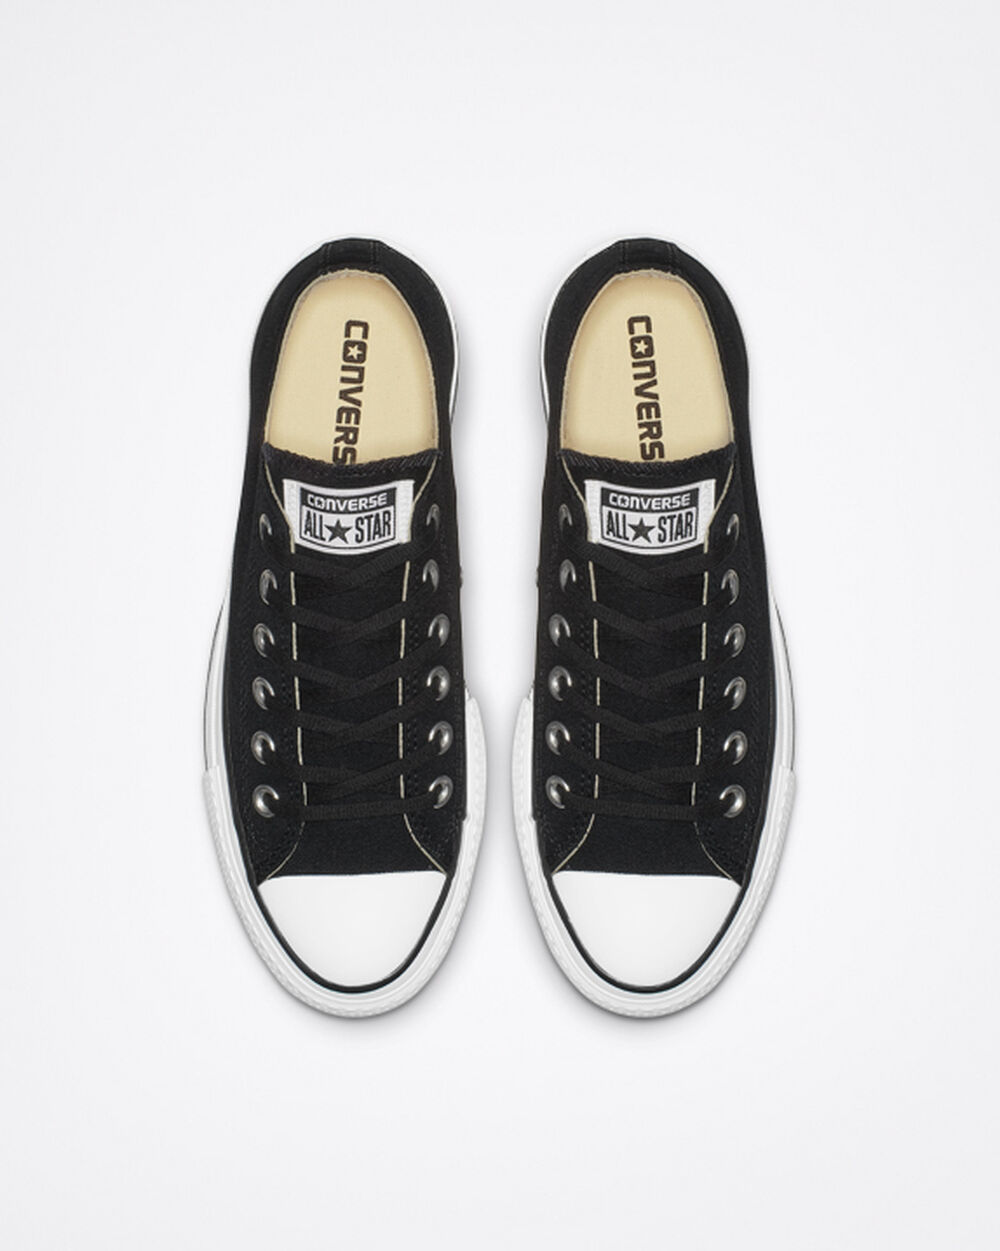 Tenis Converse Chuck Taylor All Star Mujer Negros Blancos | Mexico-684276